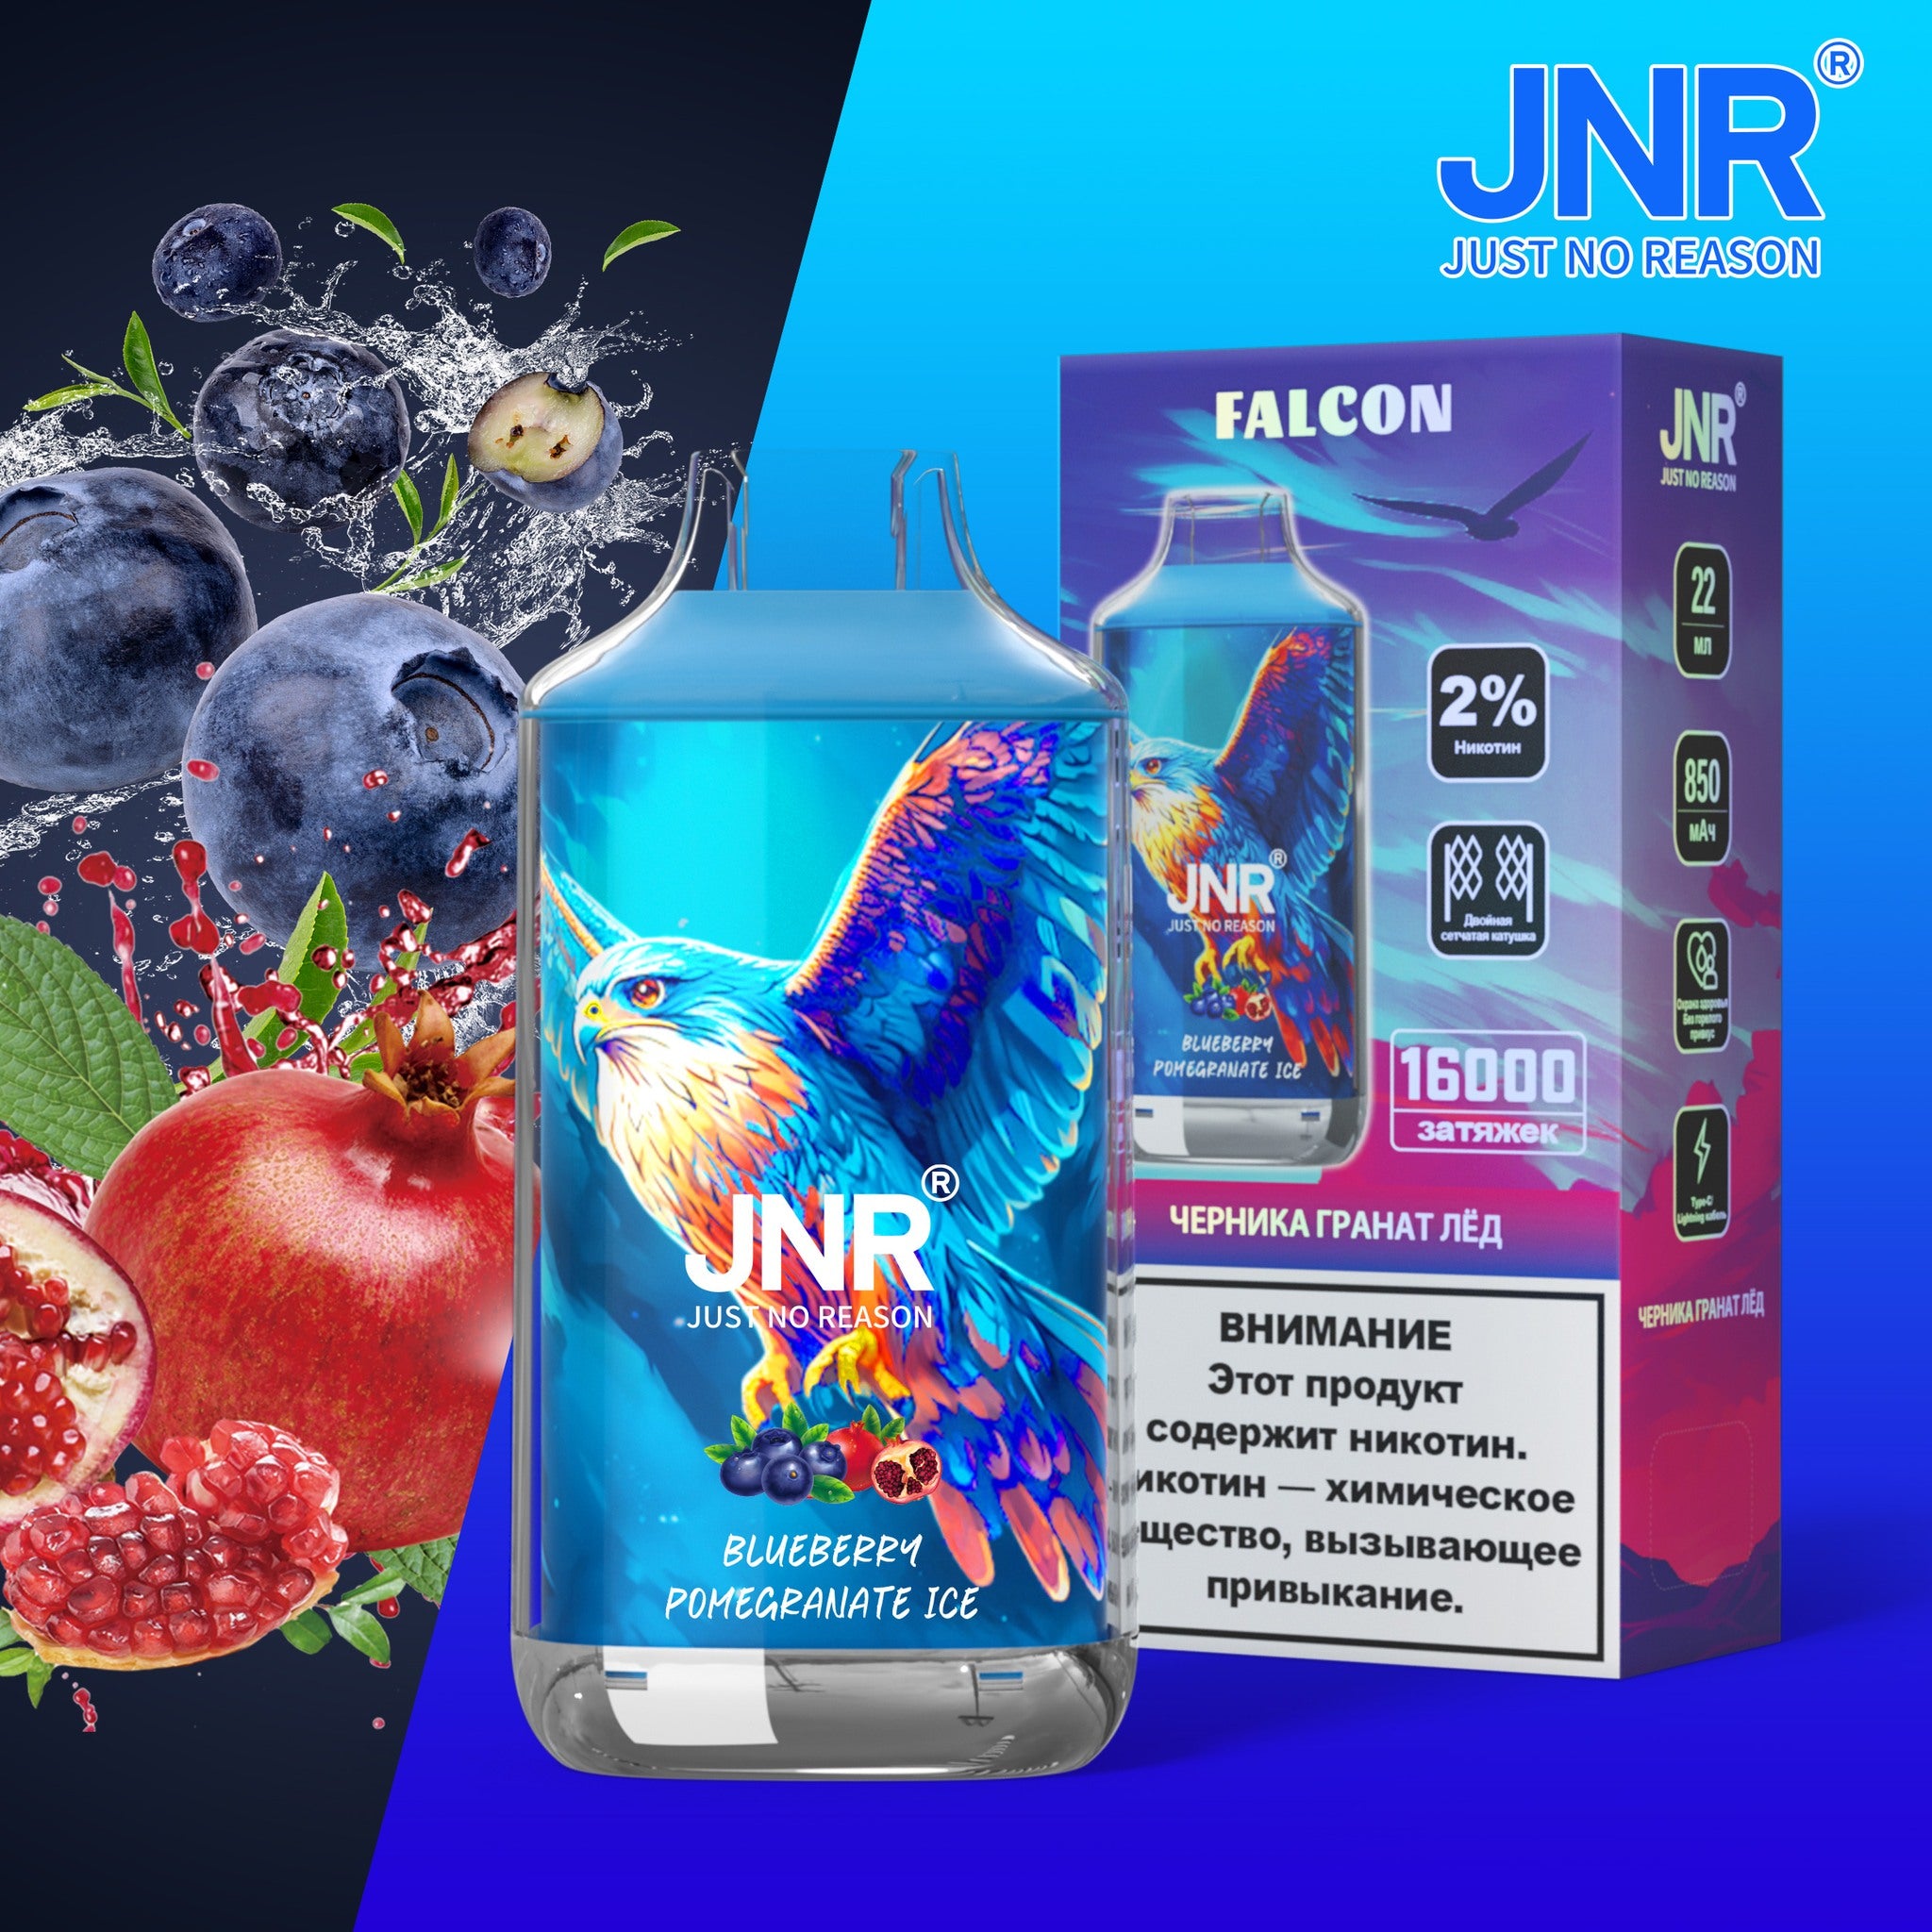 JNR FALCON 16000 PUFFS - BLUEBERRY POMEGRANATE ICE